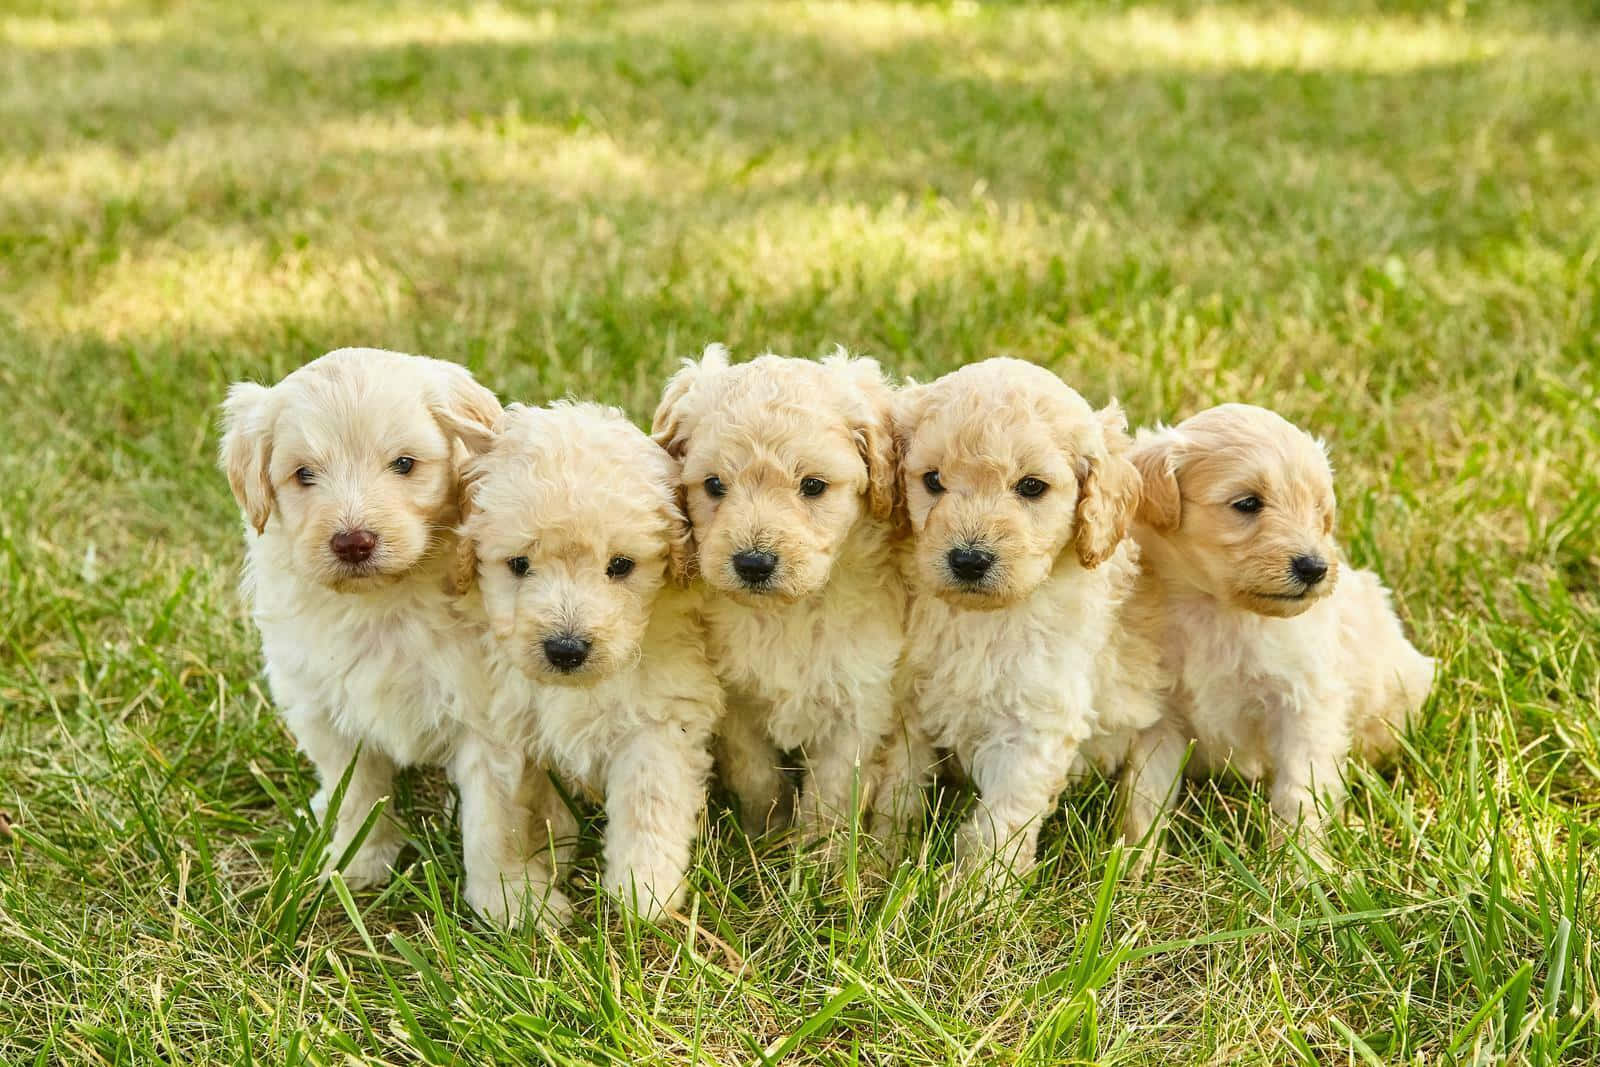 A group of adorable puppies playing together in a grassy field